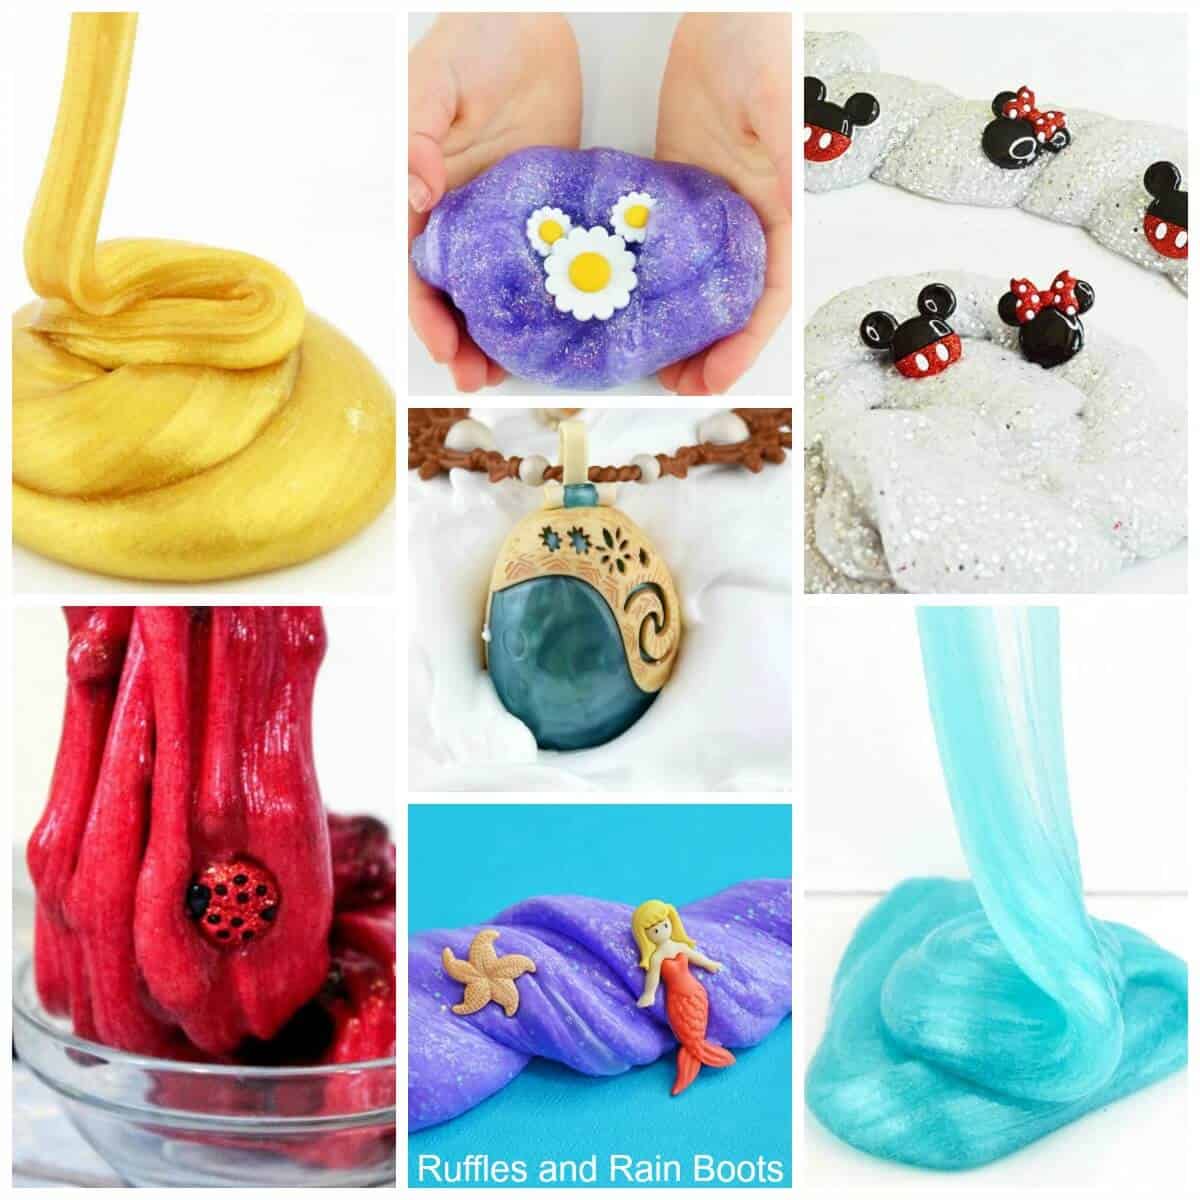 Amazing slime recipes to entertain with glitter slime, butter slime, fluffy slime, borax-free slime and so much more. Ideas for young kids and older ones (even adults)! #slime #slimerecipes #diyslime #glitterslime #butterslime #clayslime #howtomakeslime #howtocolorslime #easyslime #easyslimerecipes #boraxfreeslime #contactsolutionslime #rufflesandrainboots